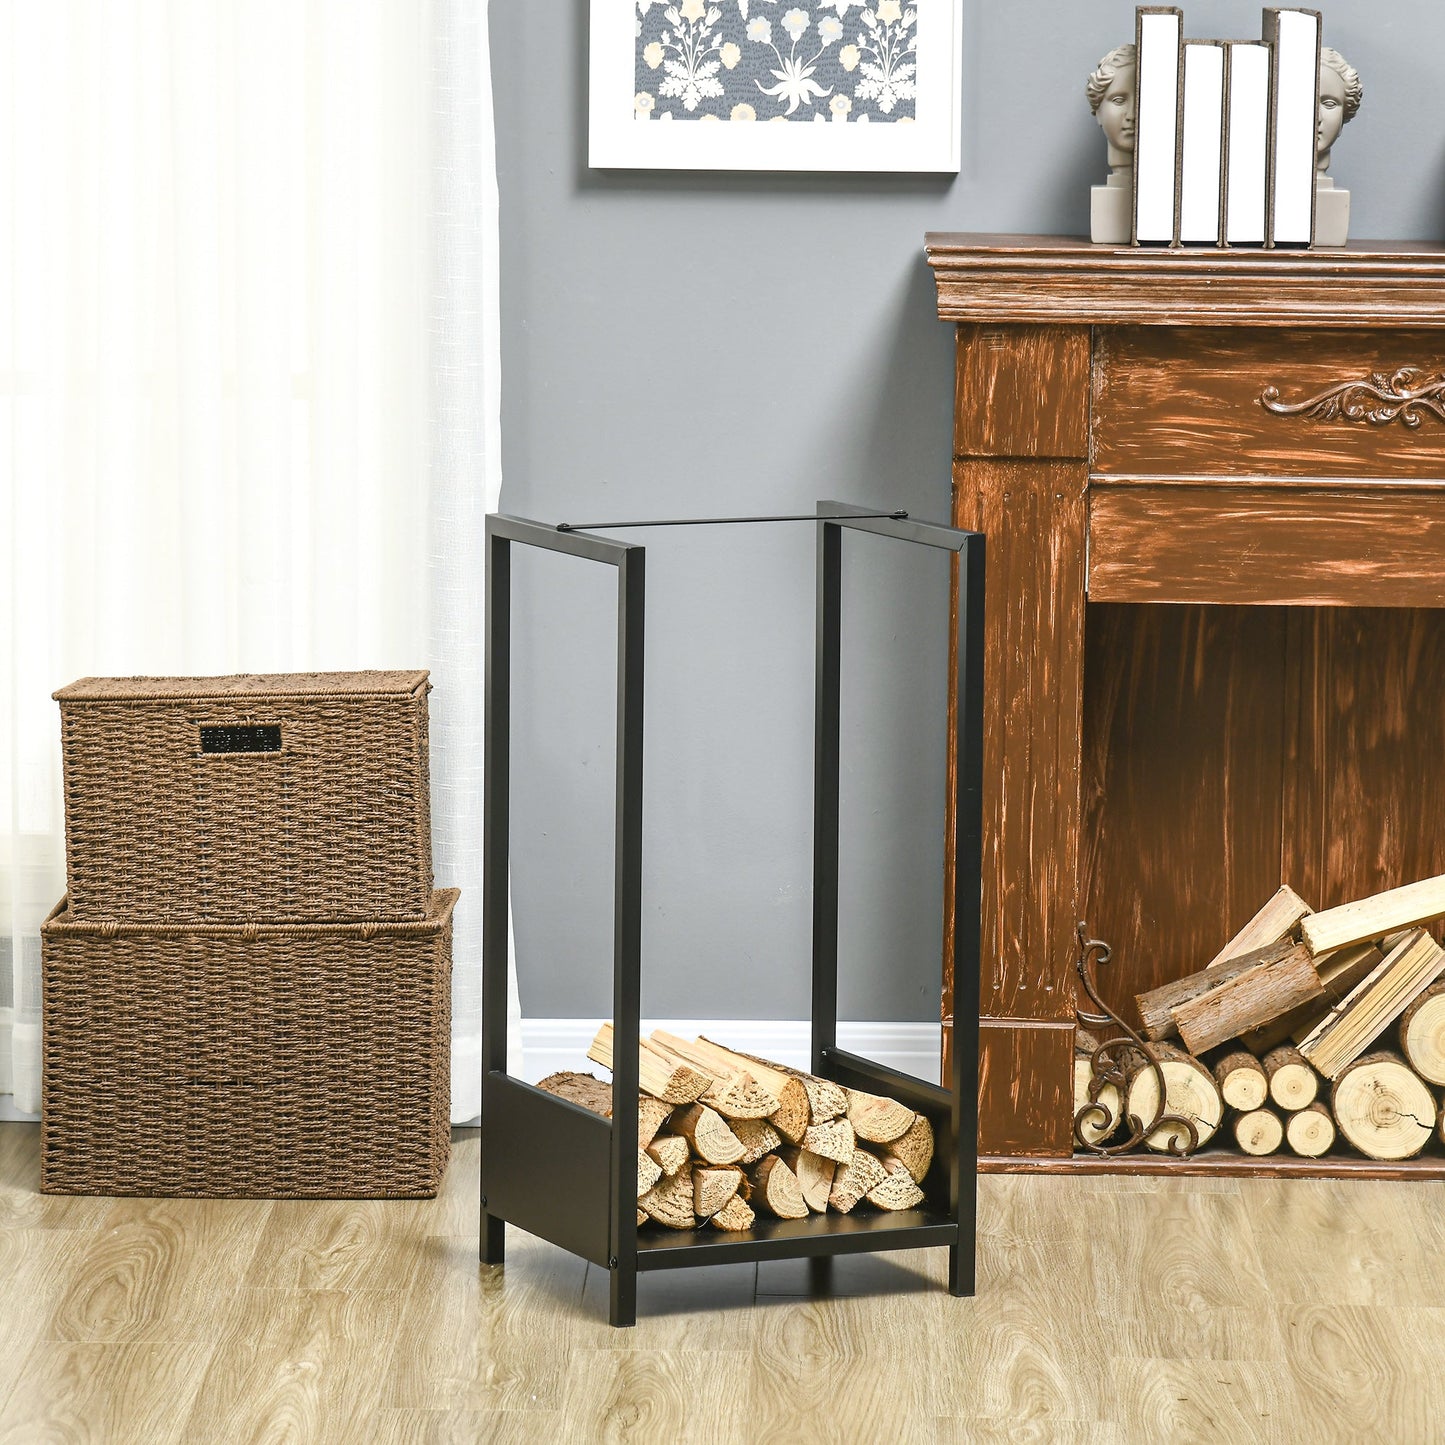 Firewood Rack, Log Holder for Fireplace, Outdoor Indoor Wood Storage Stacker, 15.4" x 13.8" x 29.9", Black at Gallery Canada